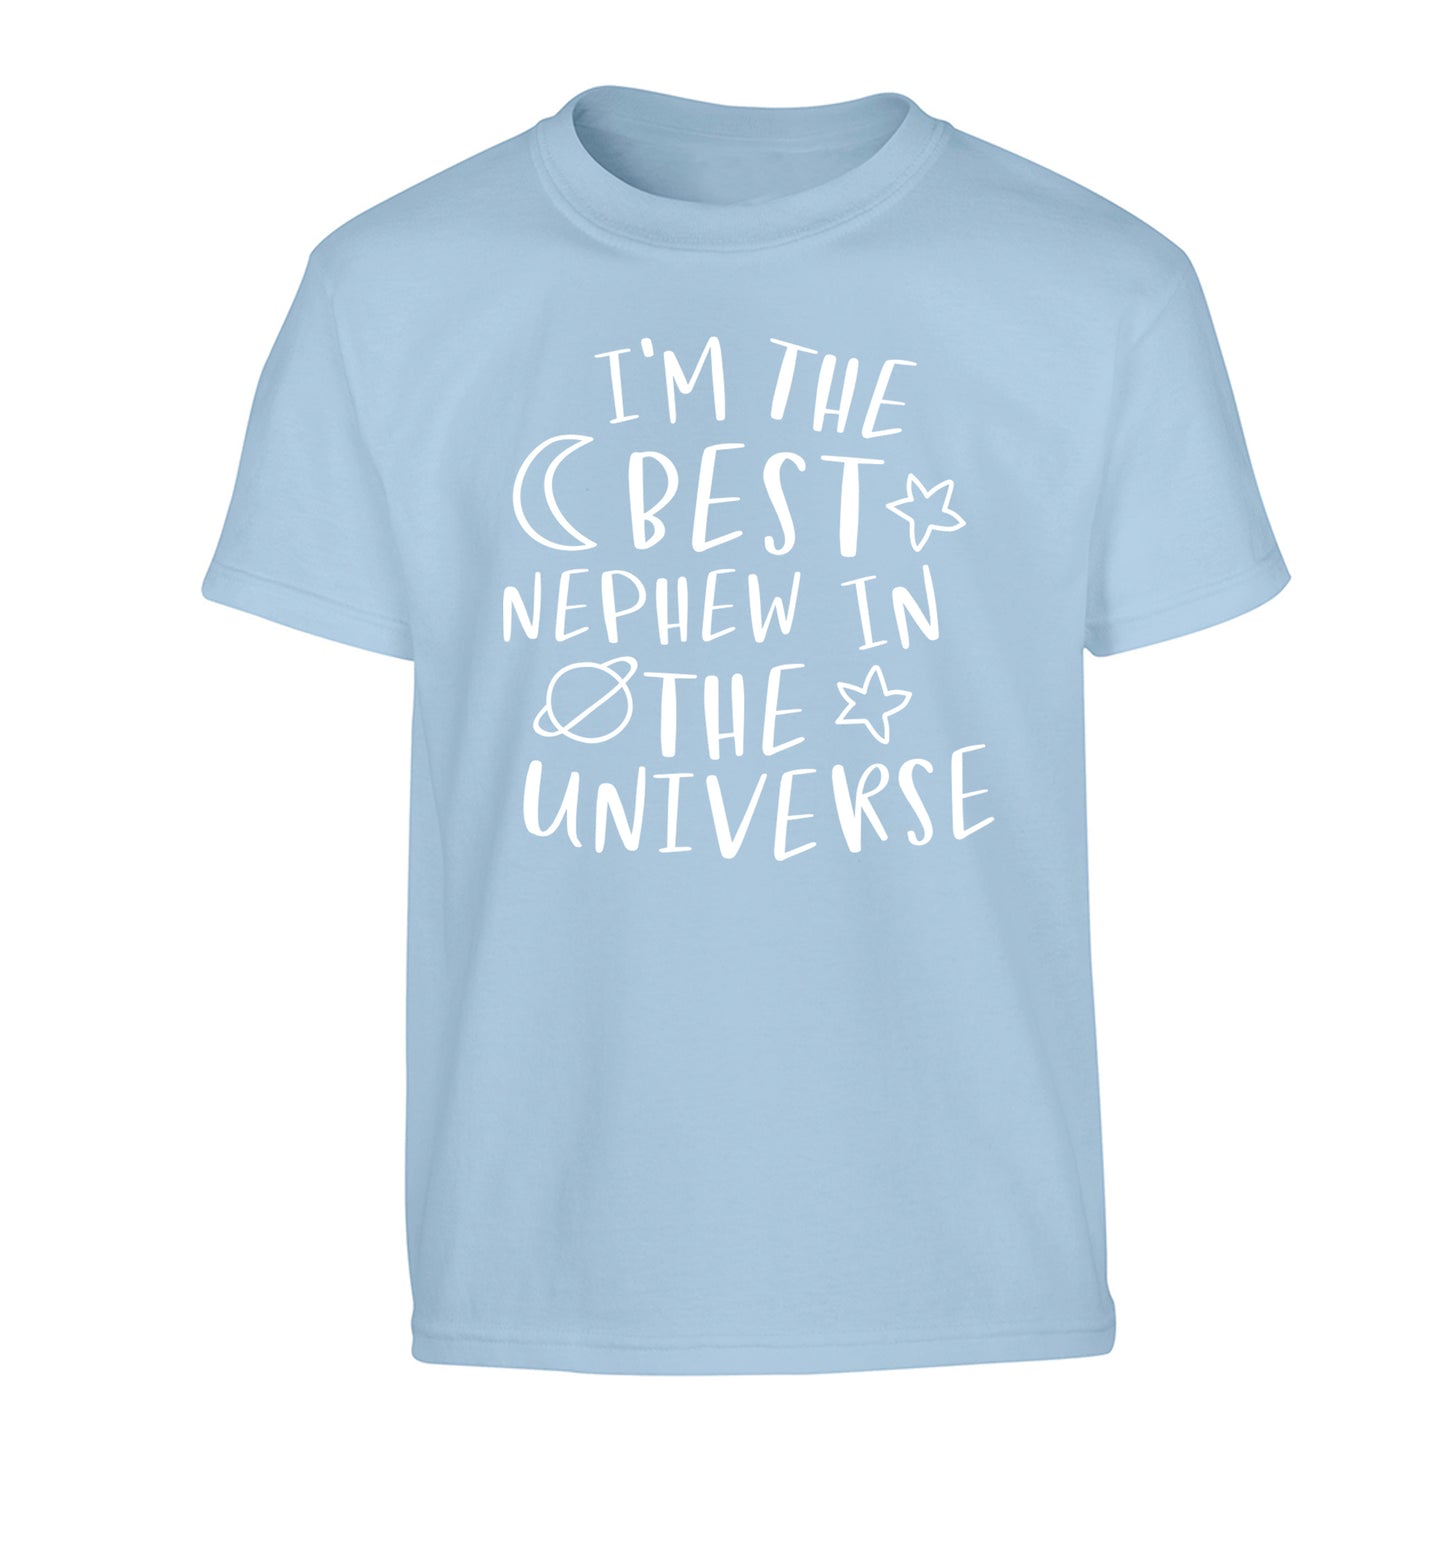 I'm the best nephew in the universe Children's light blue Tshirt 12-13 Years